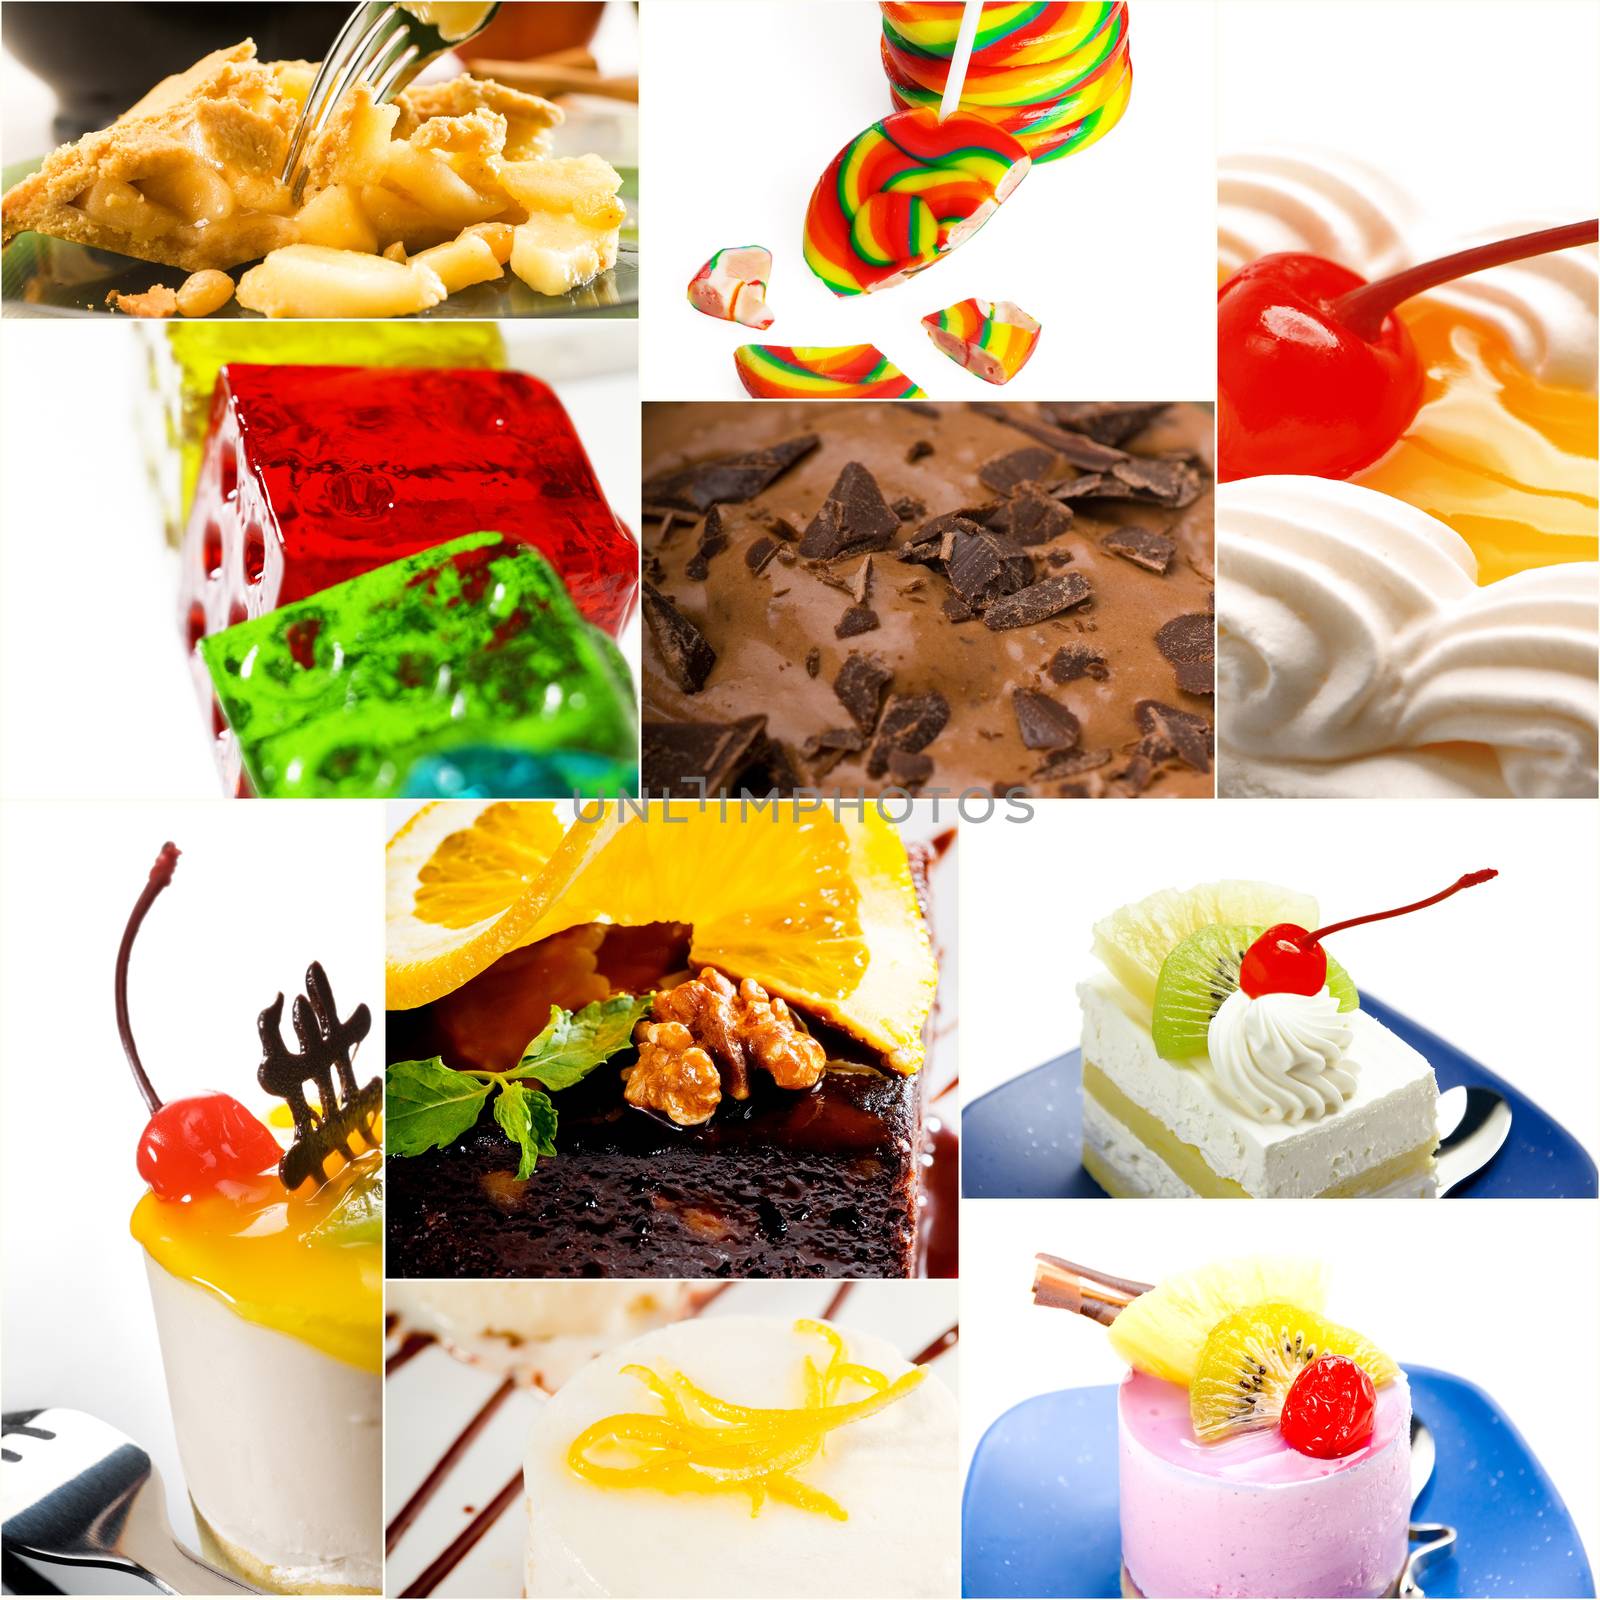 dessert cake and sweets collection collage bright mood